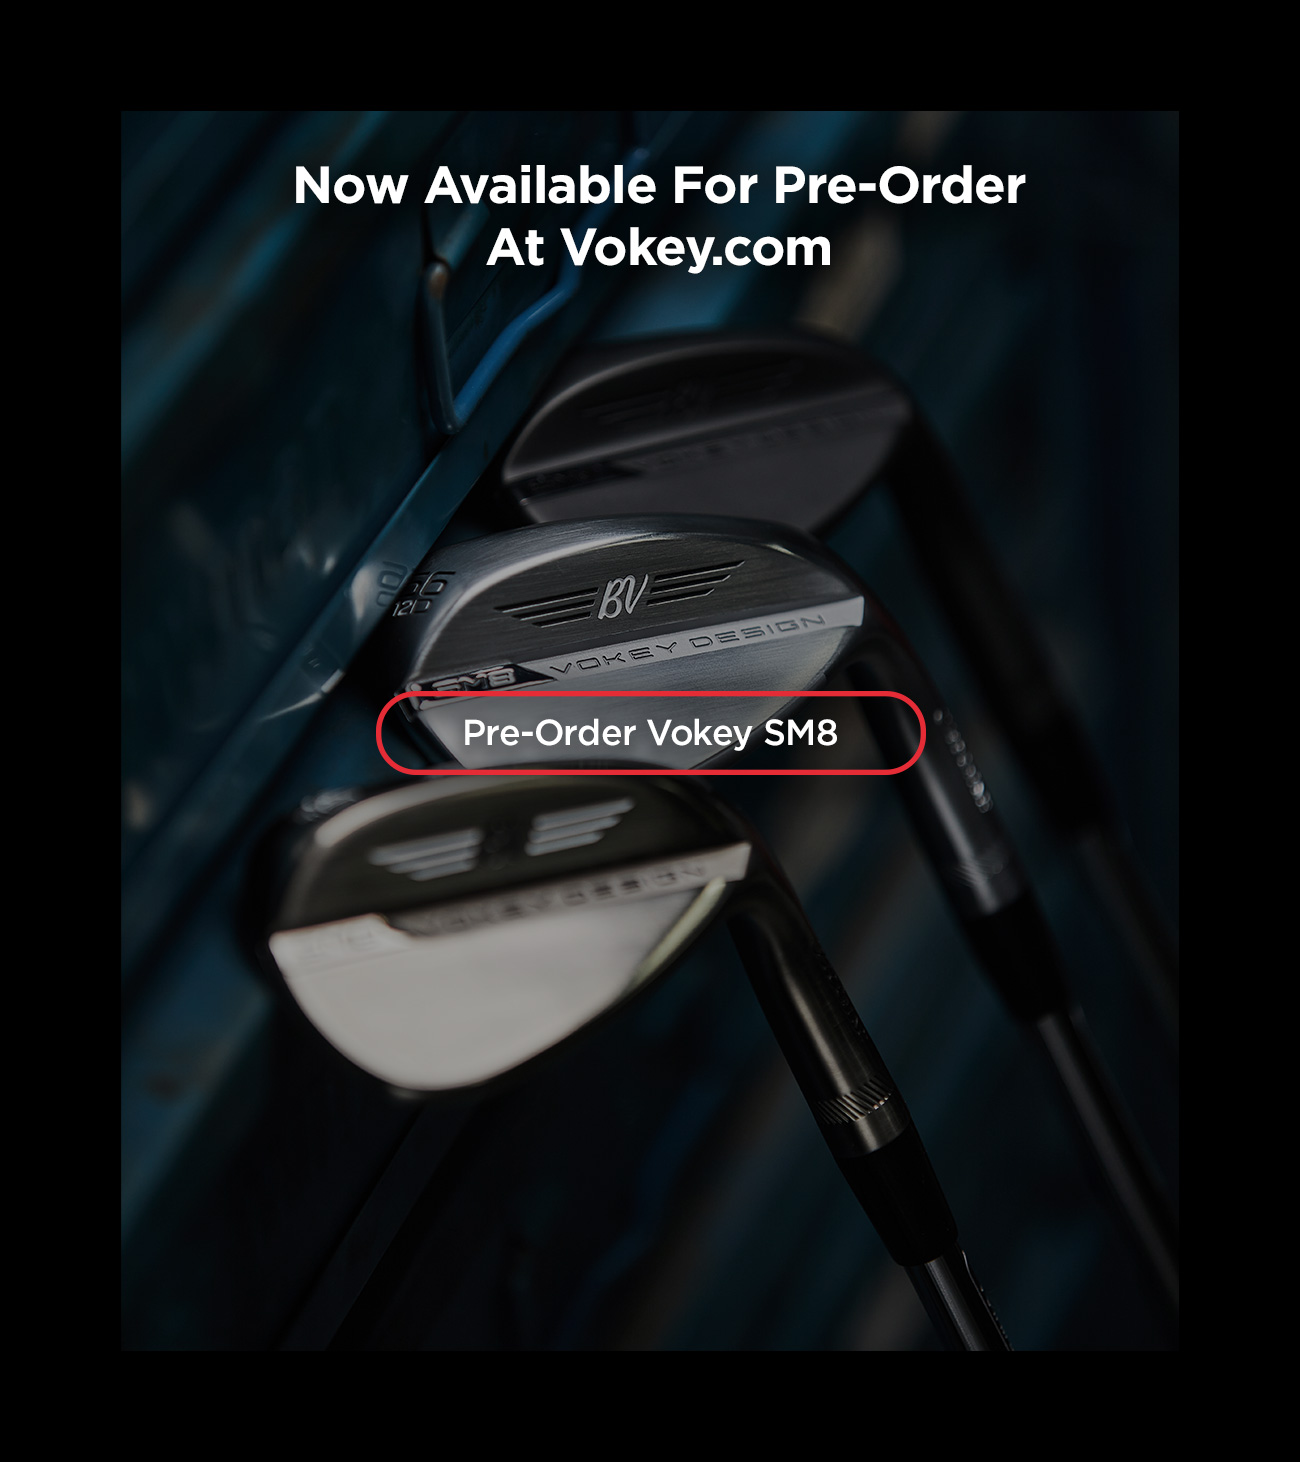 Now Available for Pre-Order at Vokey.com